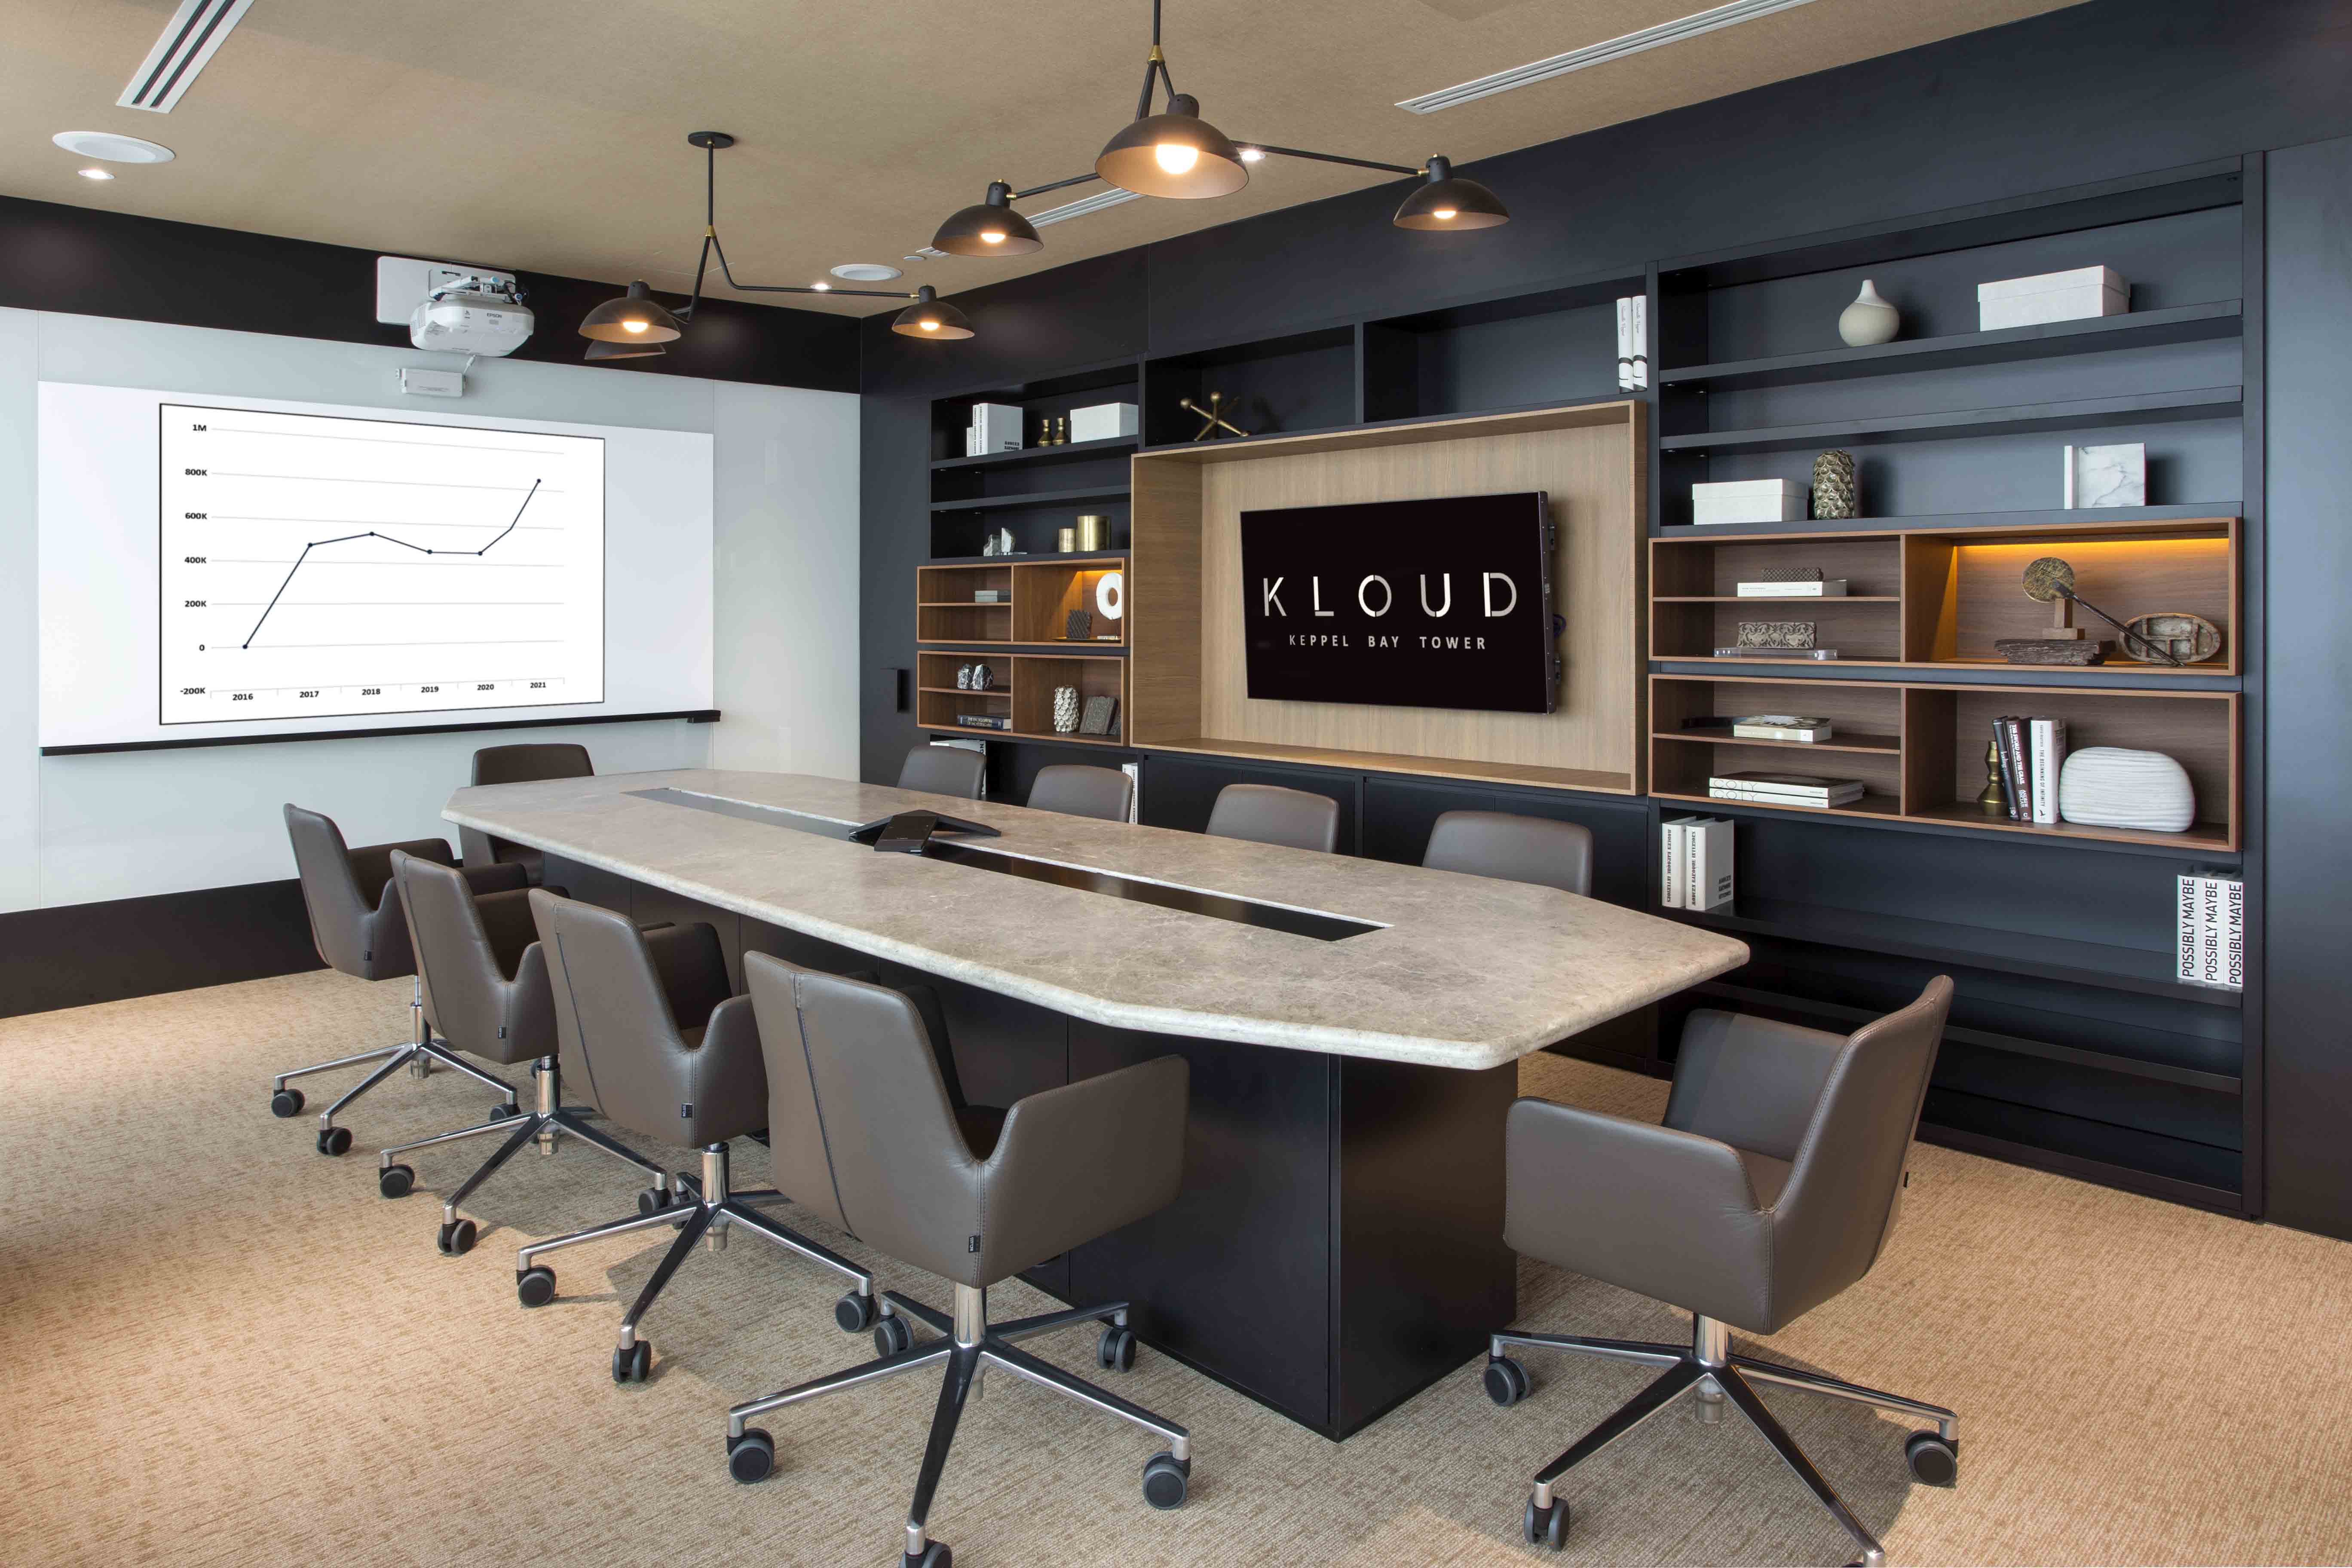 Conference Room Decorating Ideas